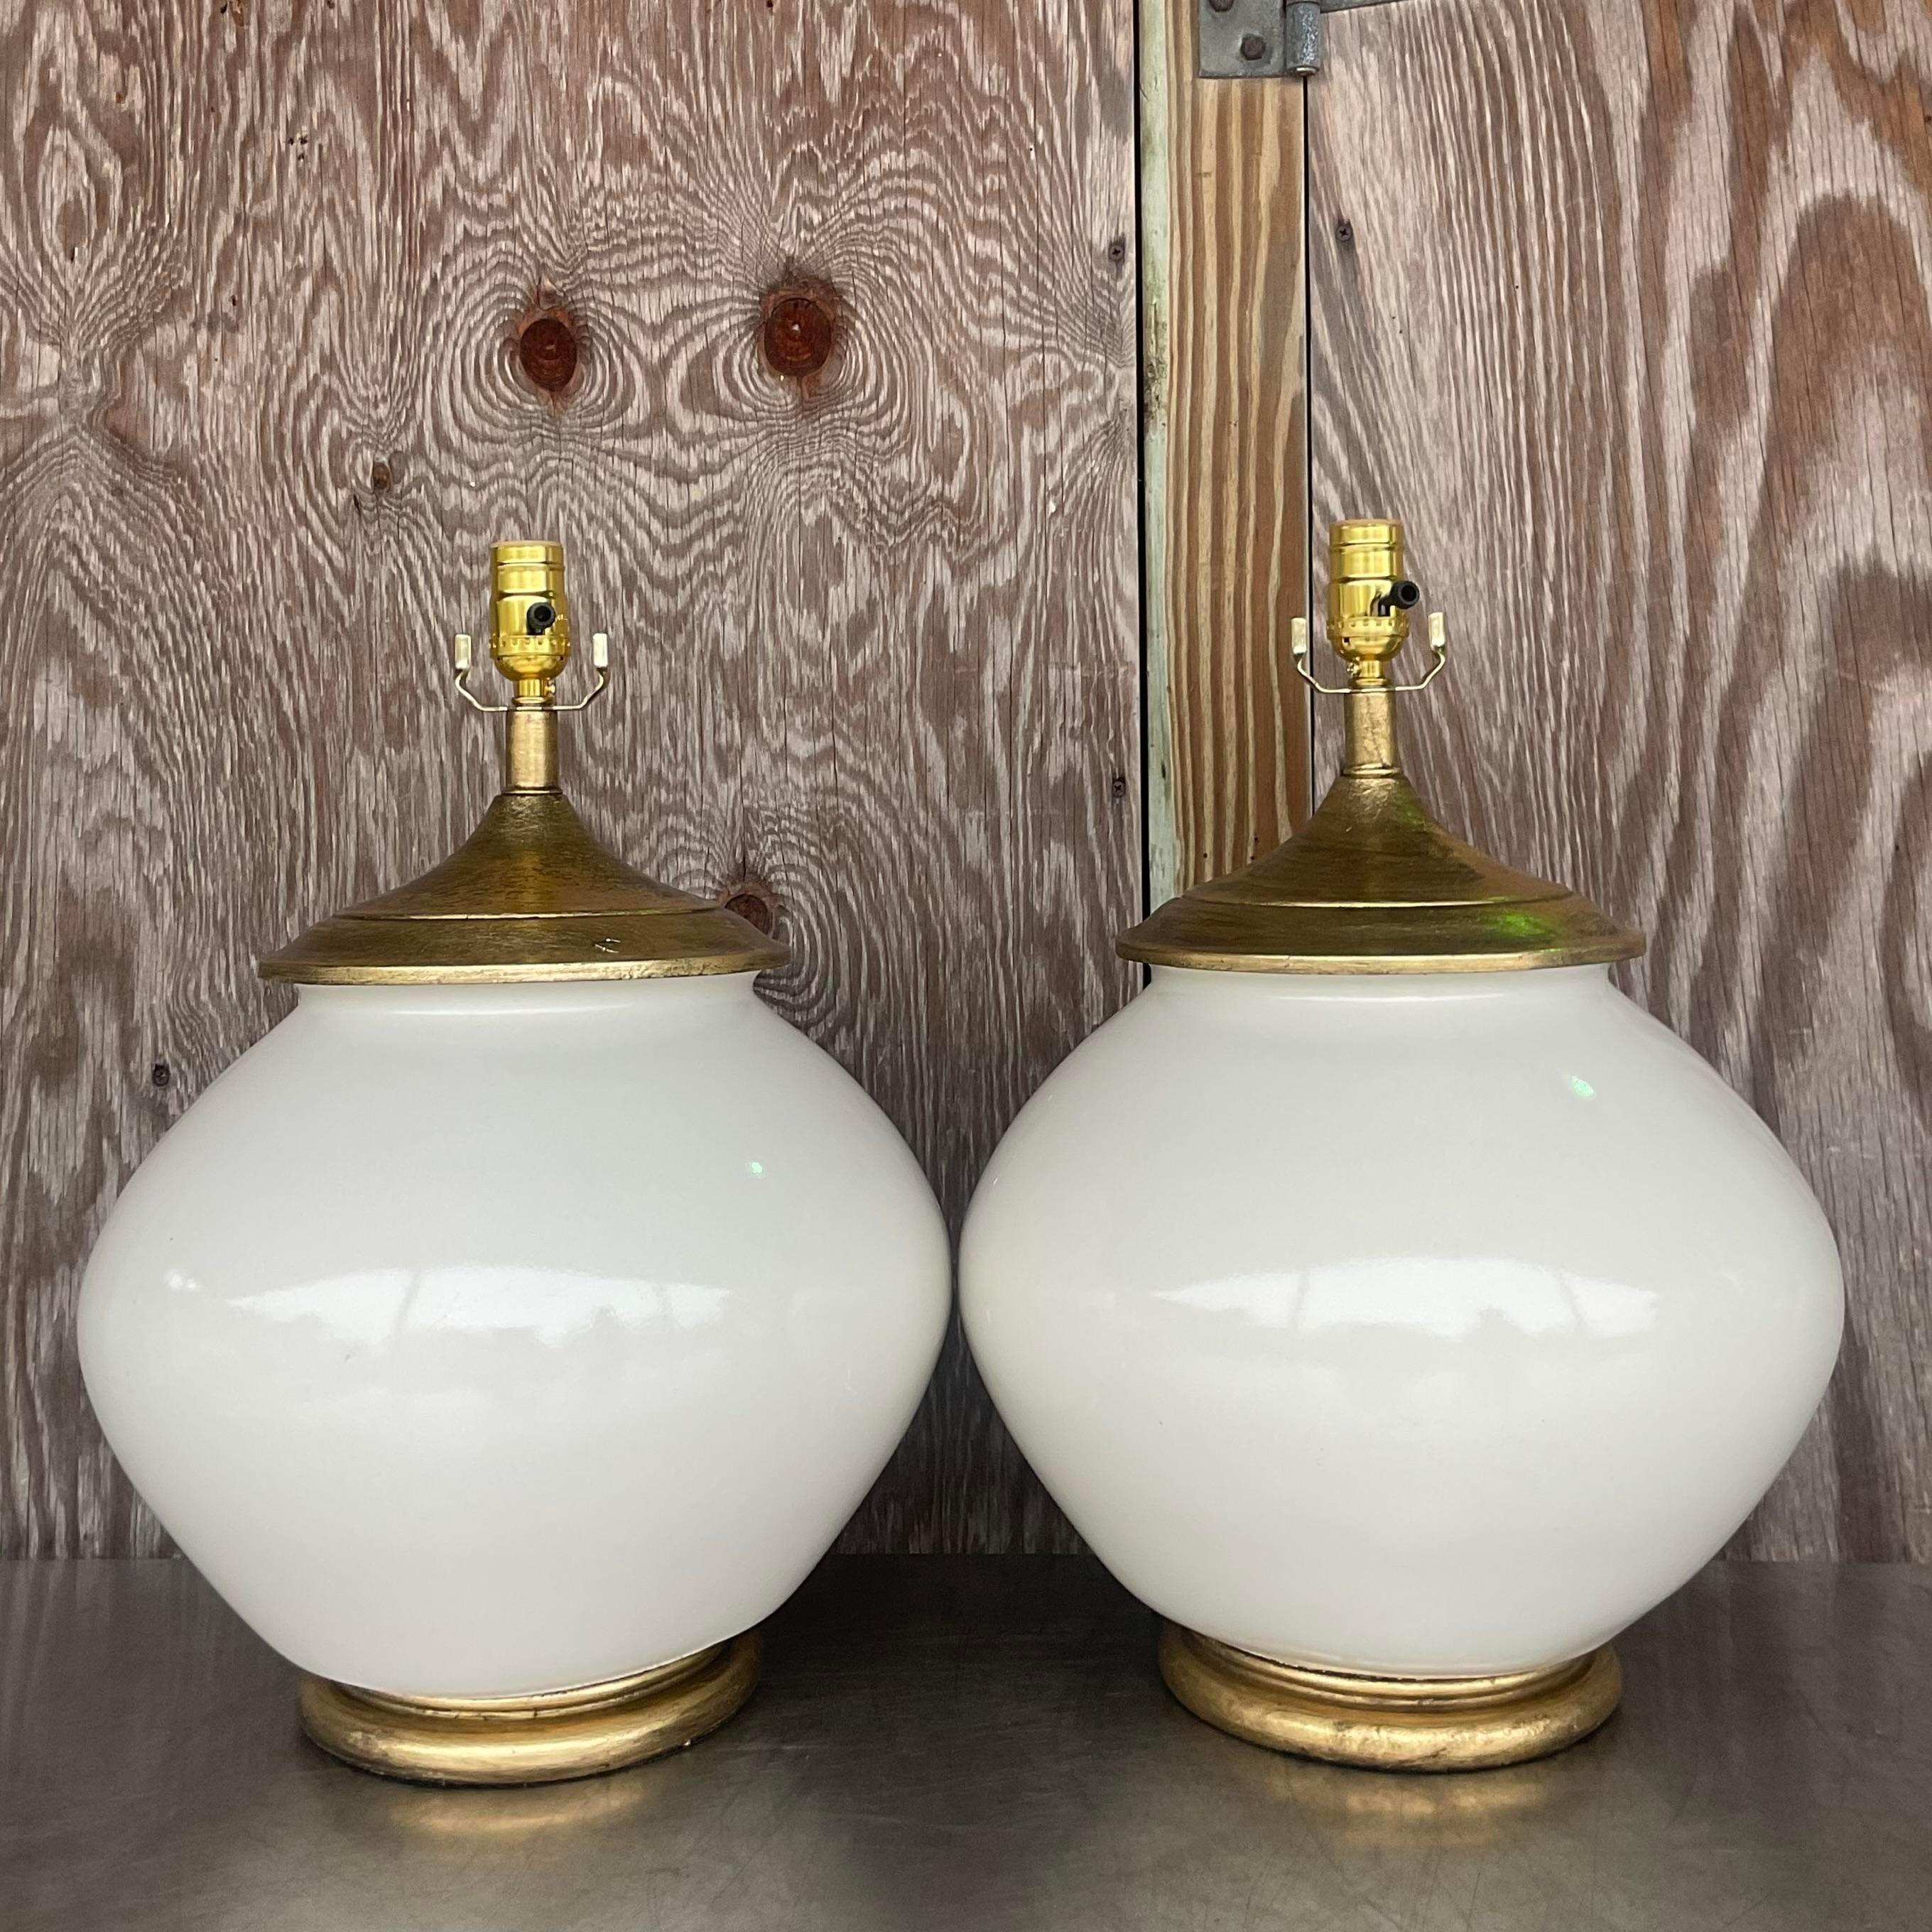 American Vintage Boho Alsy Glazed Ceramic Lamps - a Pair For Sale